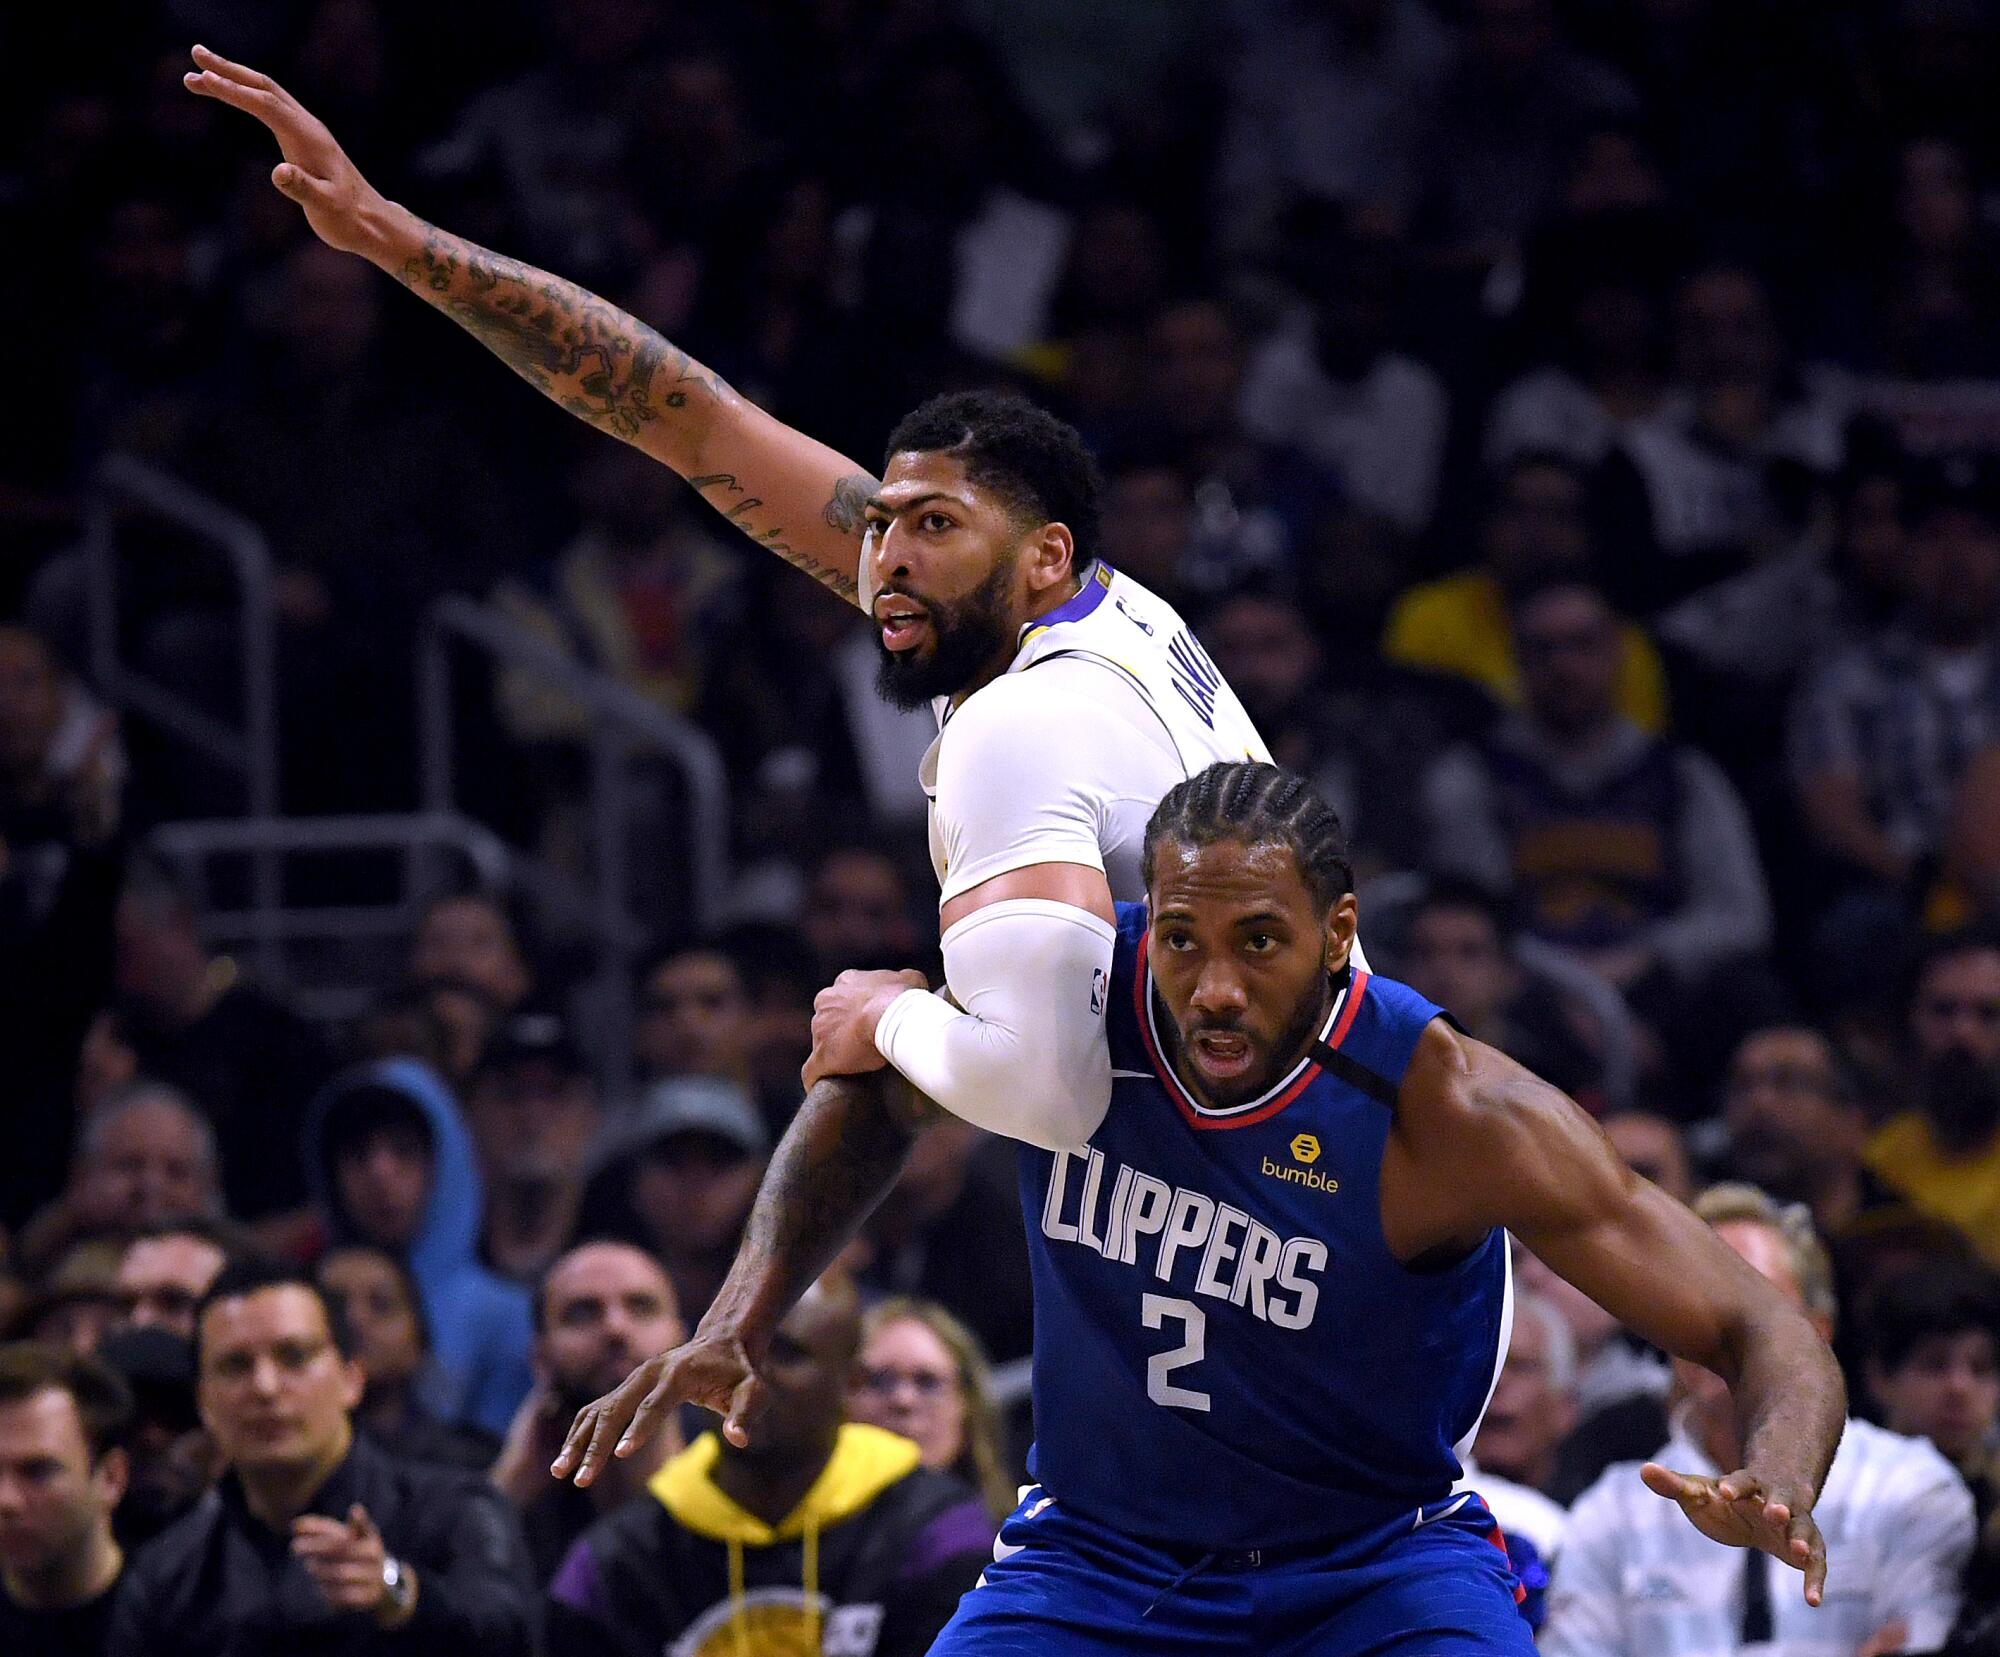 Clippers; Kawhi Leonard guards Lakers' Anthony Davis on March 8 at Staples Center.